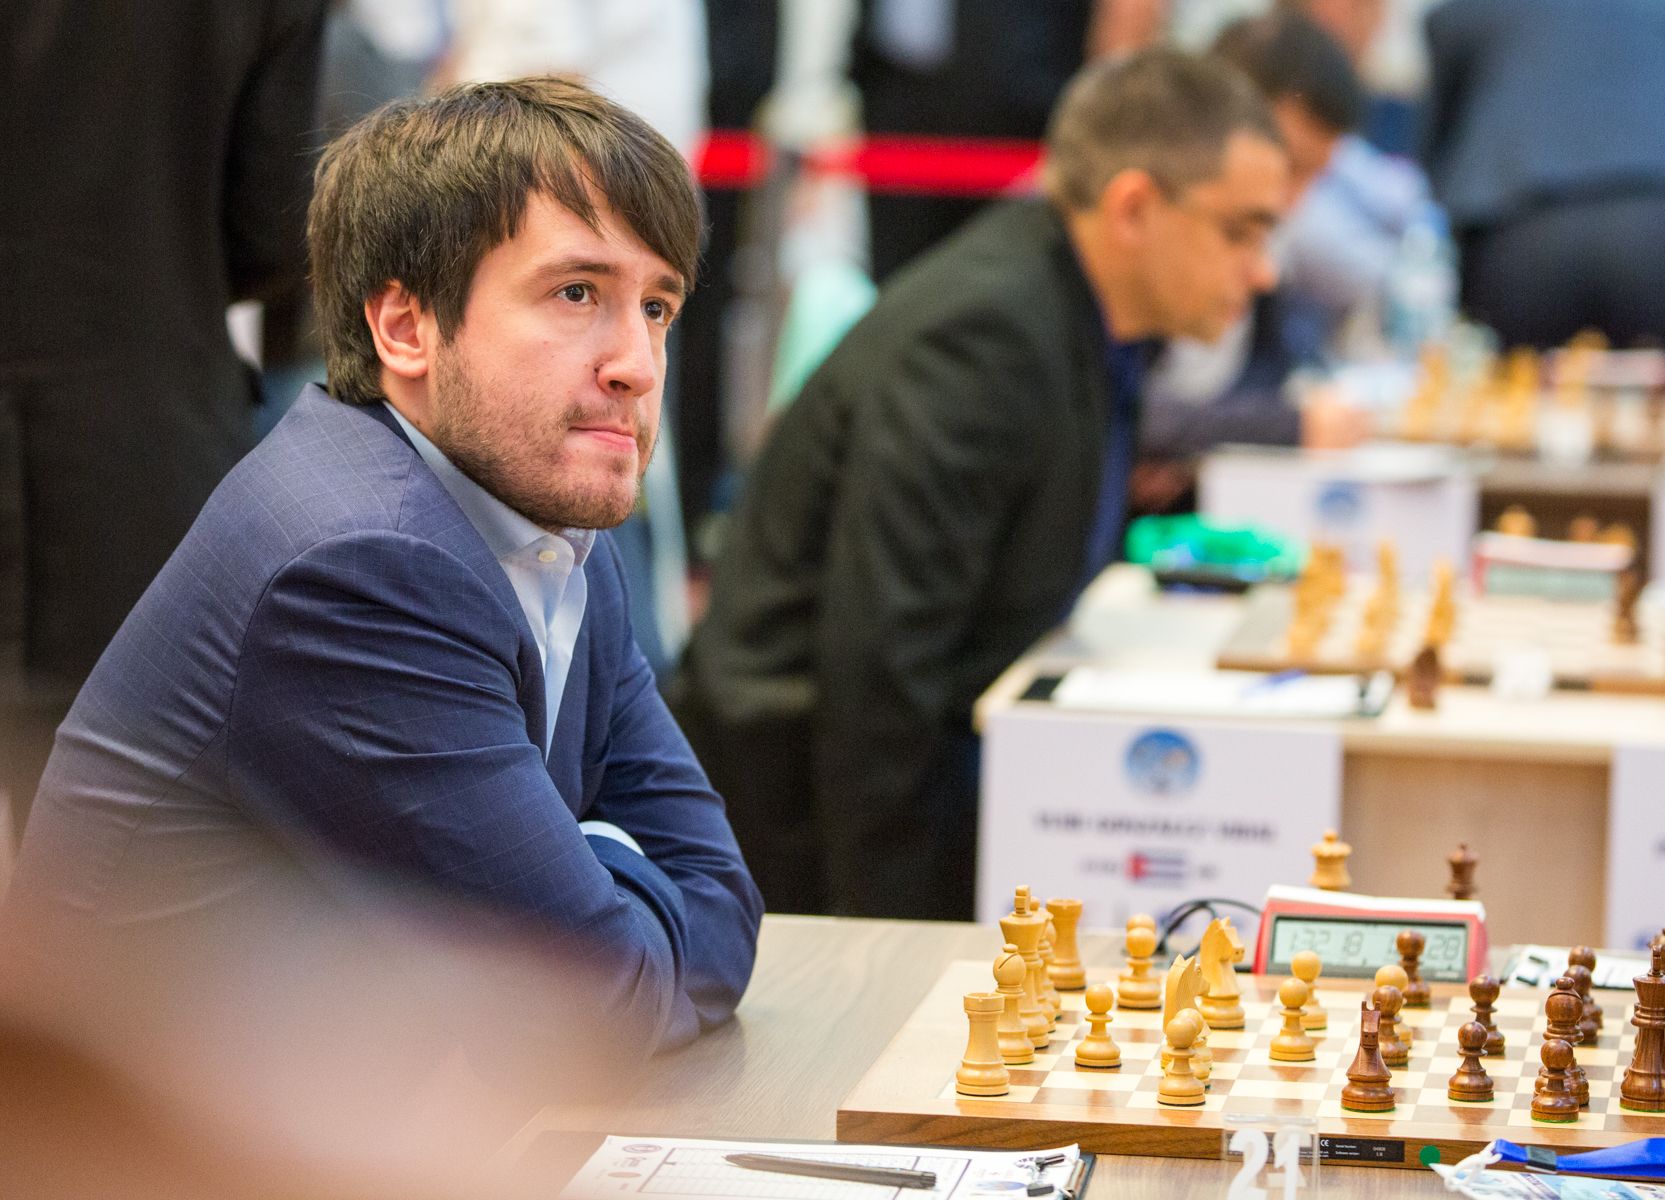 chess24.com on X: Teimour Radjabov is the first player confirmed by FIDE  in the 2022 Candidates Tournament, a decision Magnus Carlsen called just  ridiculous when it was suggested last year! Check out